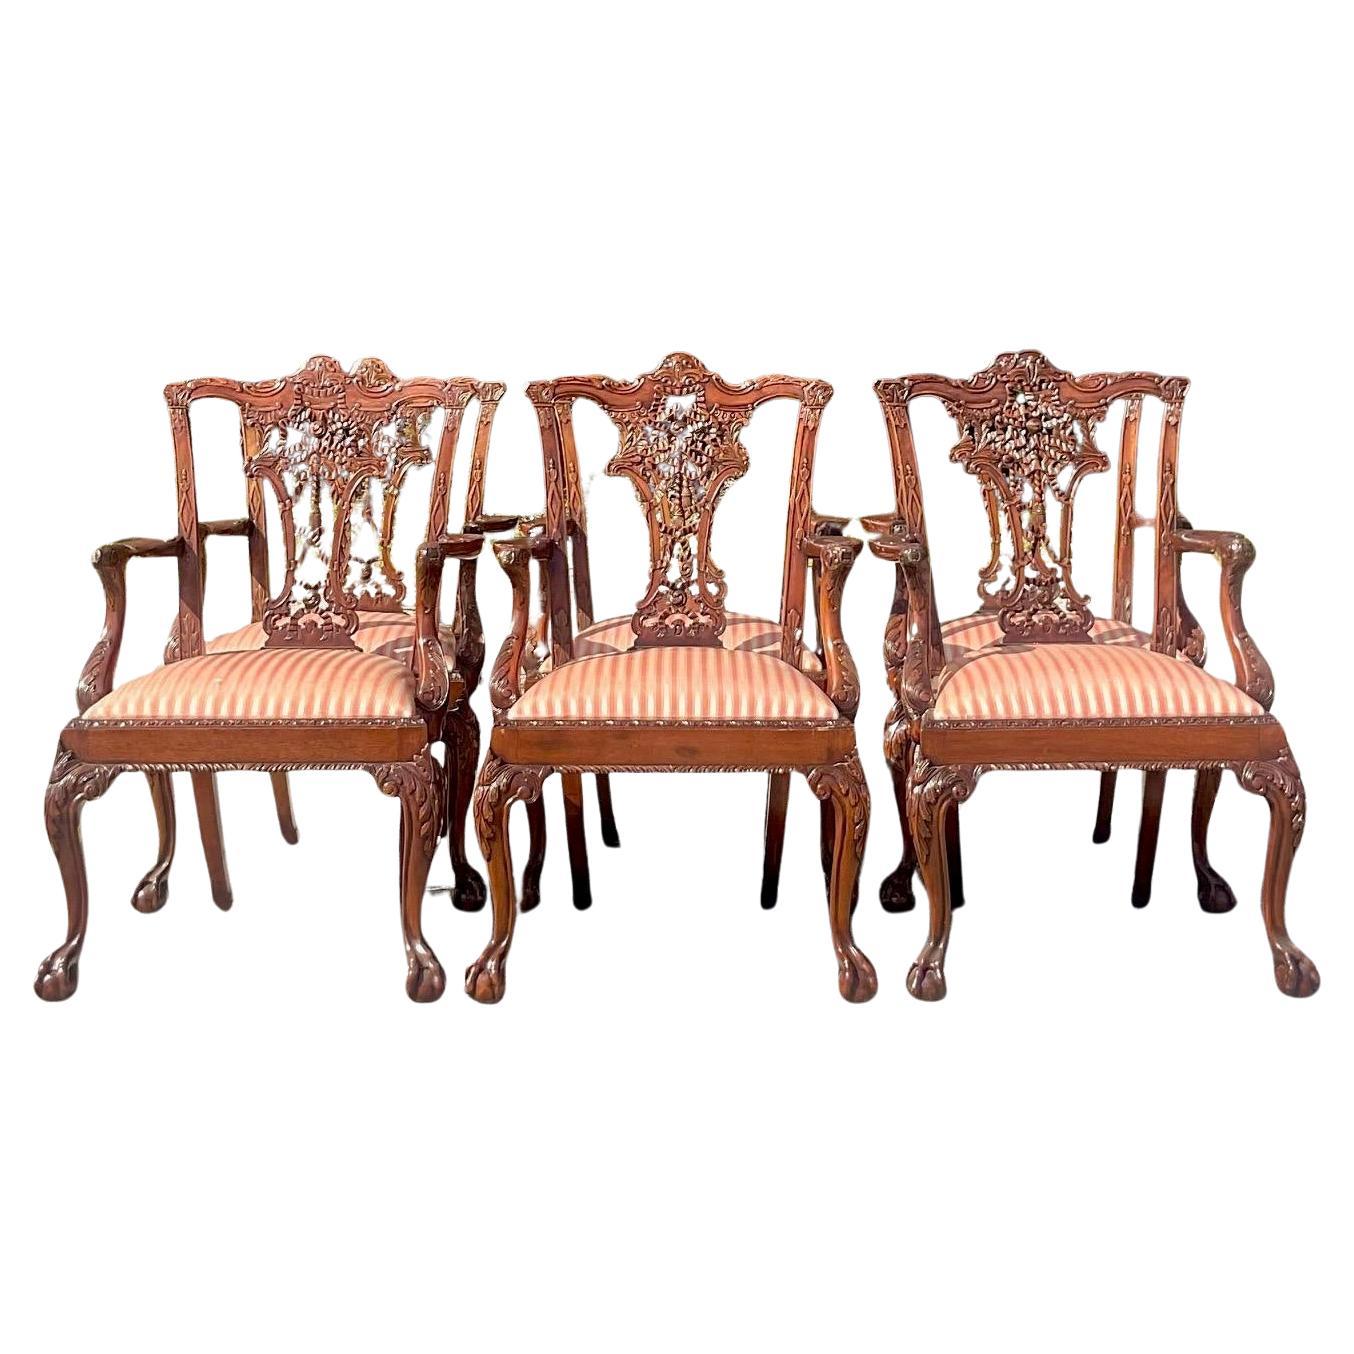 Vintage Regency Carved Chippendale Dining Chairs - Set of Six For Sale